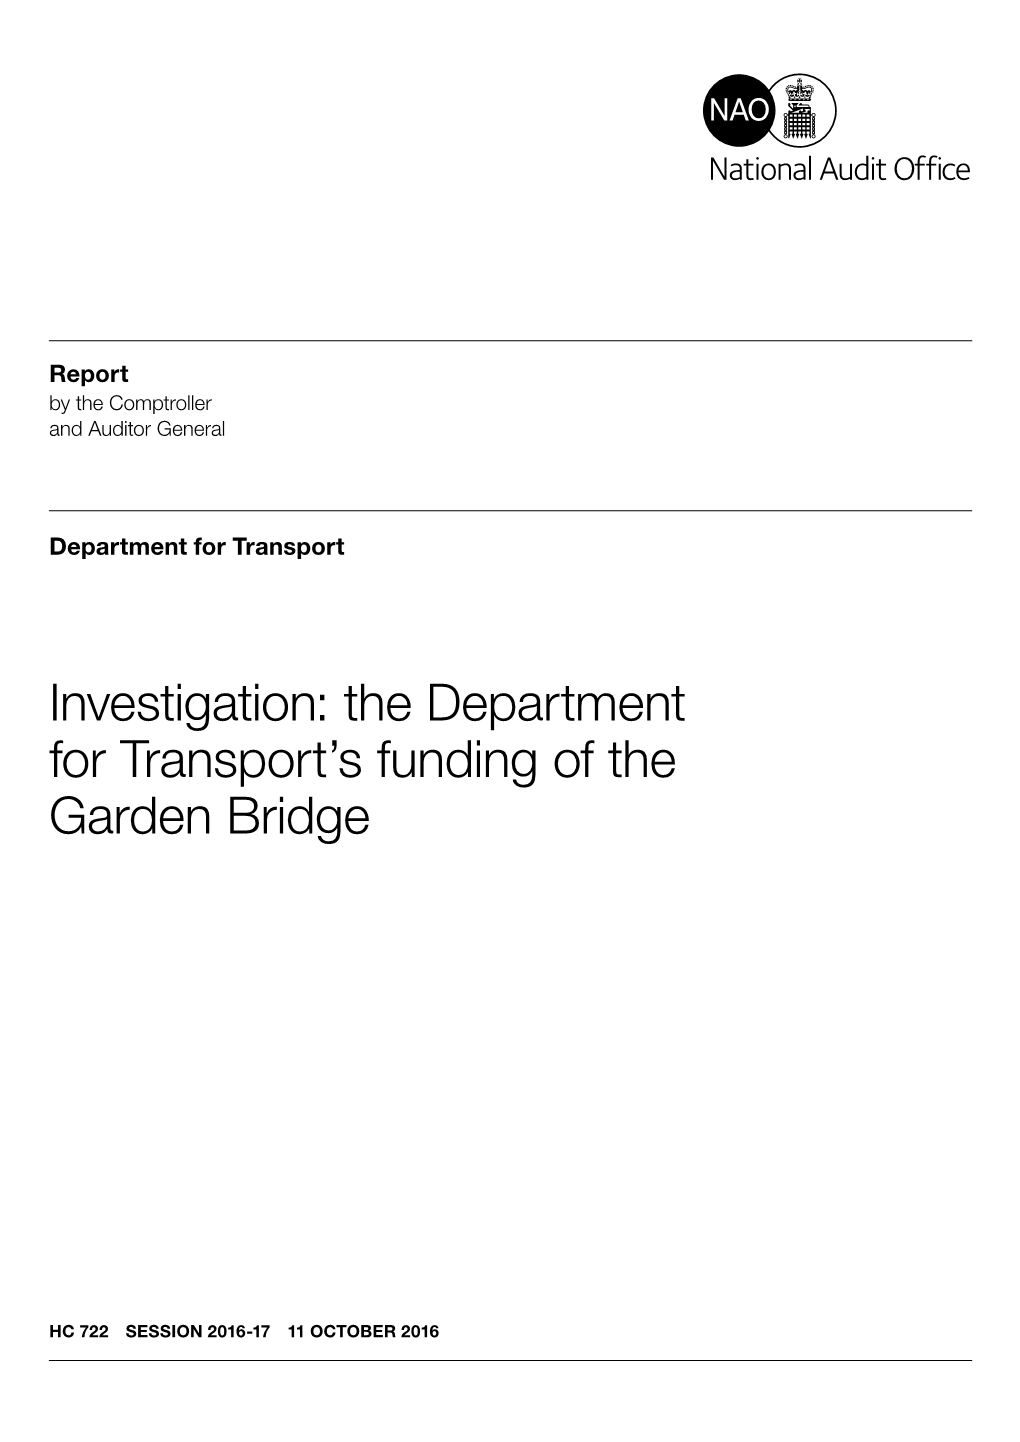 Investigation the Department for Transport's Funding of the Garden